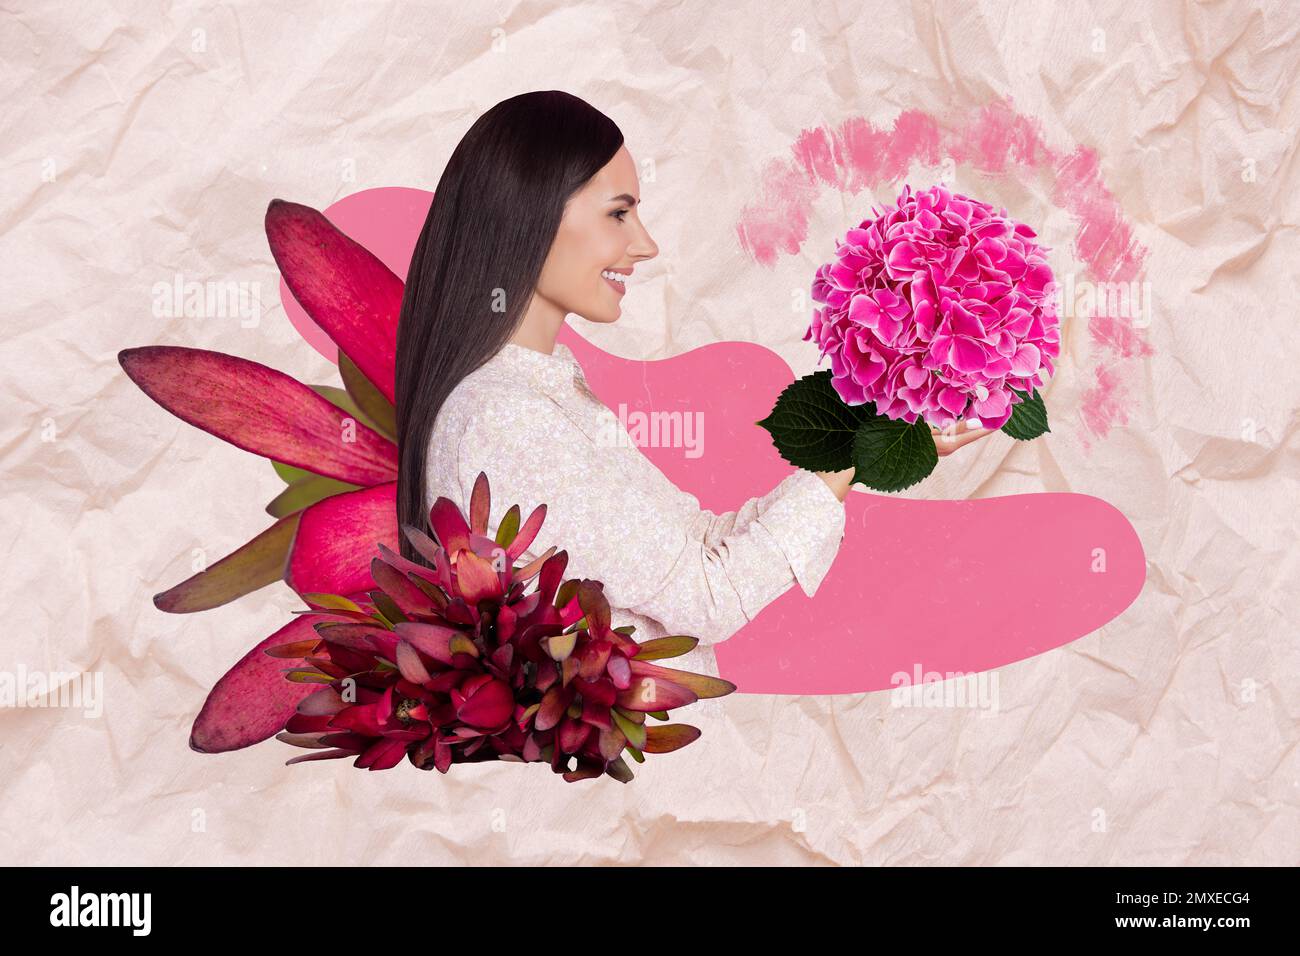 Creative template collage of beauty woman florist shop owner hold bright phlox bouquet prepare for woman day date party Stock Photo